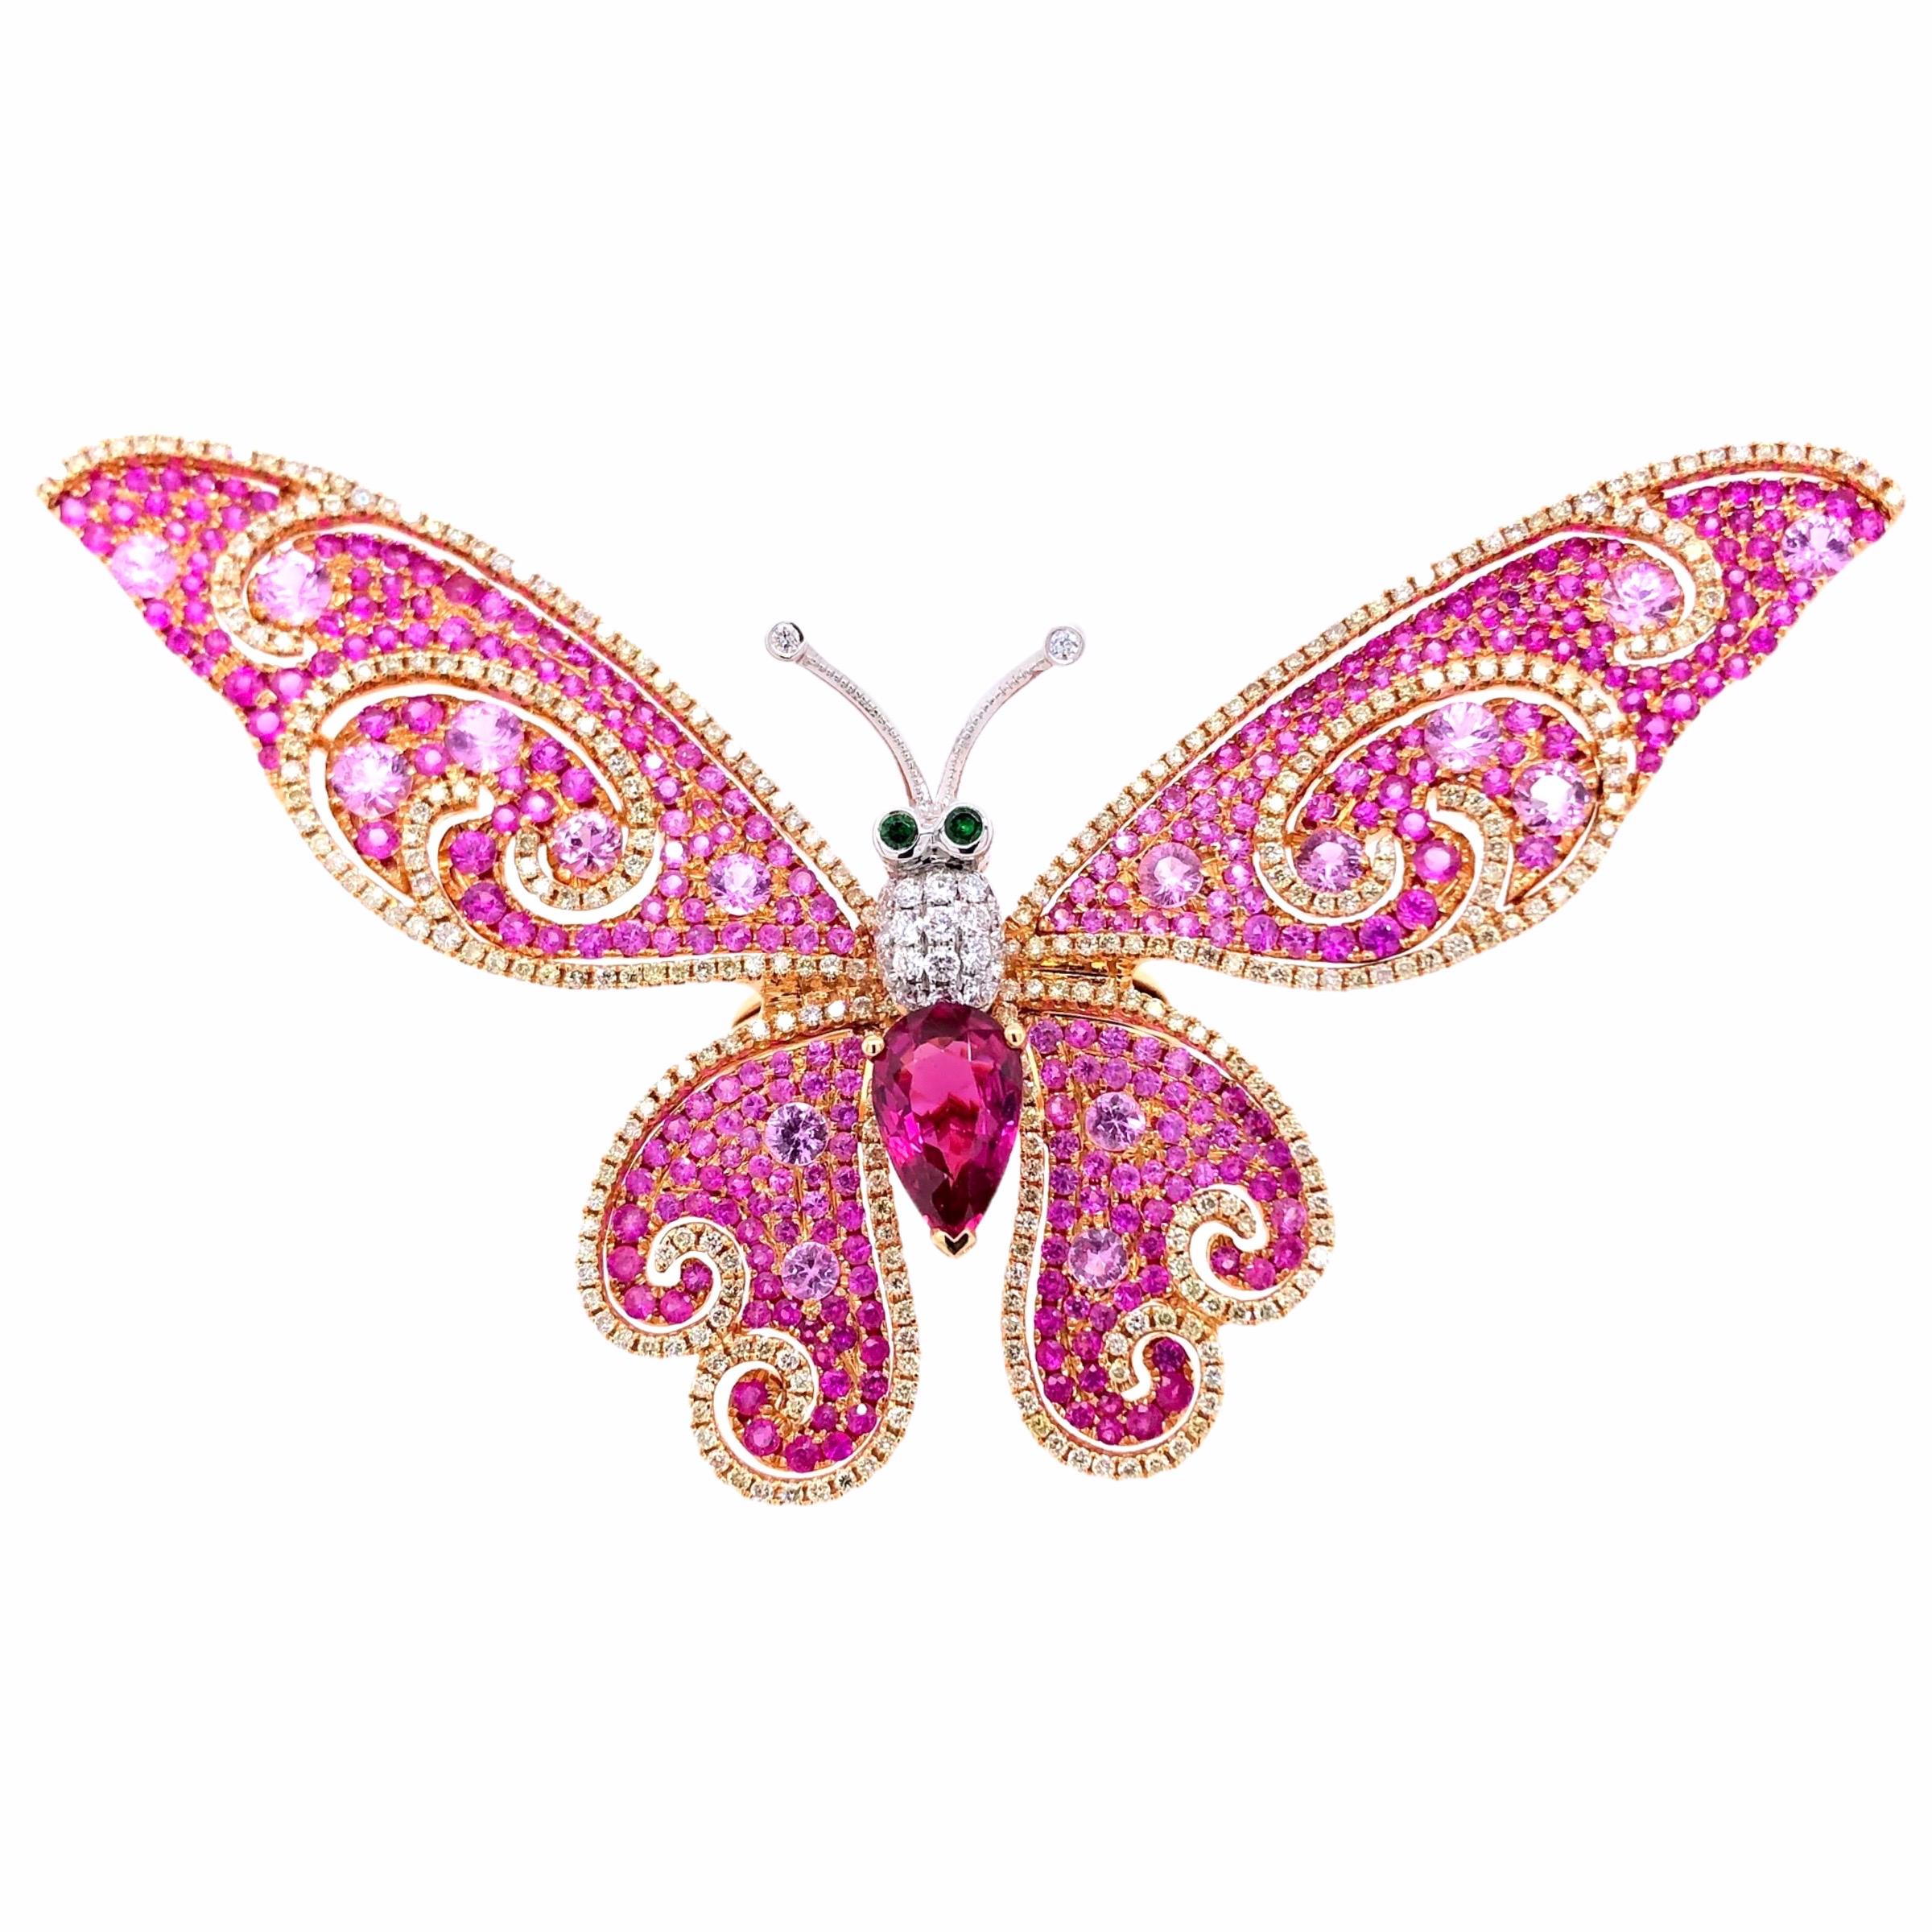 PARIS Craft House 2.19ct Unheated Ruby Sapphire Diamond Garnet Butterfly Ring in 18 Karat Rose Gold. These stunning wings are crafted with mechanical movements, small twitch of the finger allows the butterfly to flap its wings in beautiful